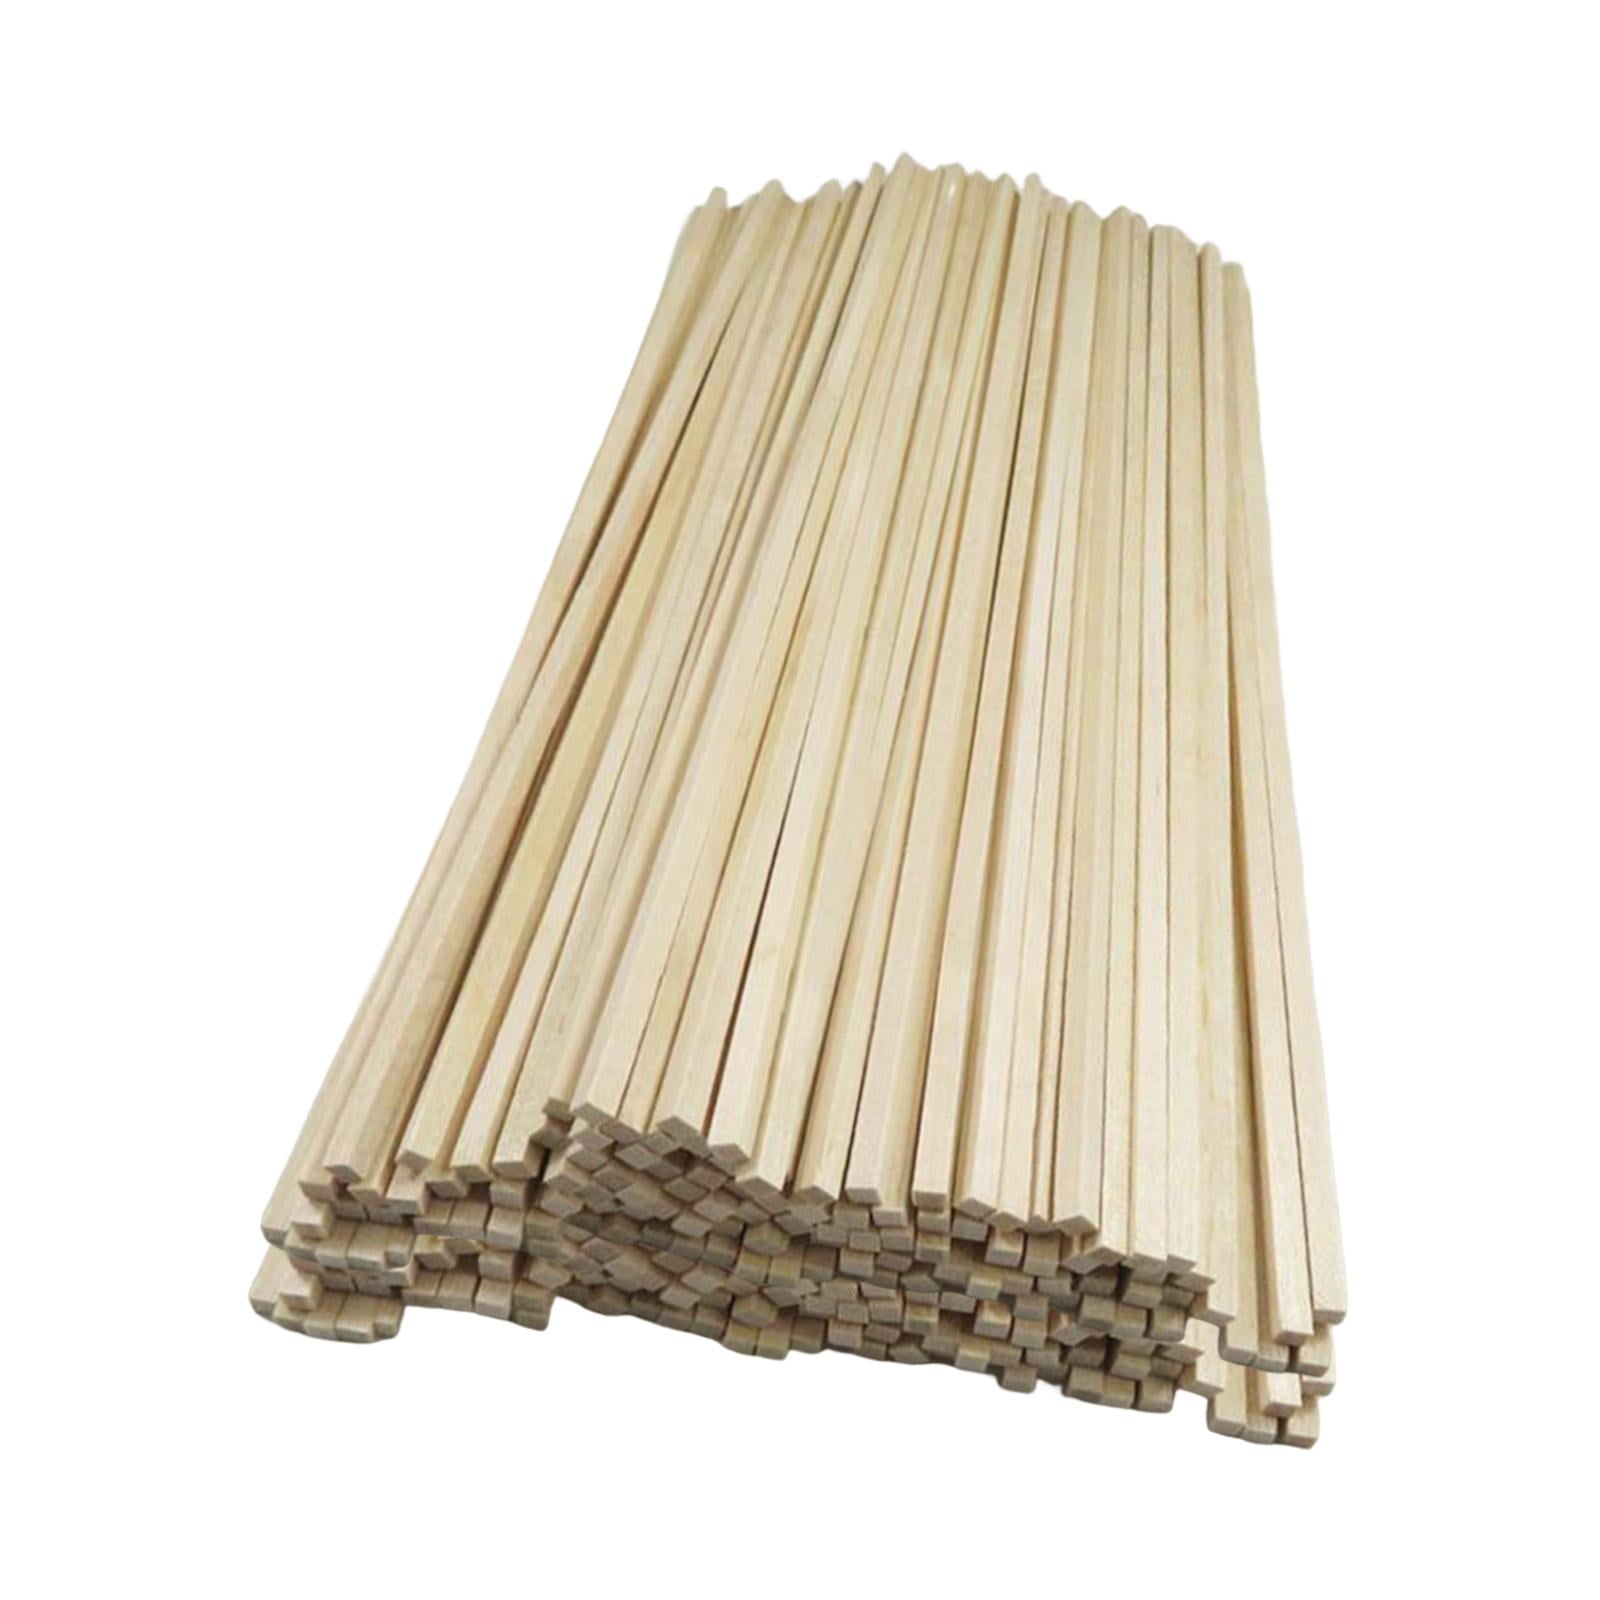 Midwest Products Genuine Balsa Wood